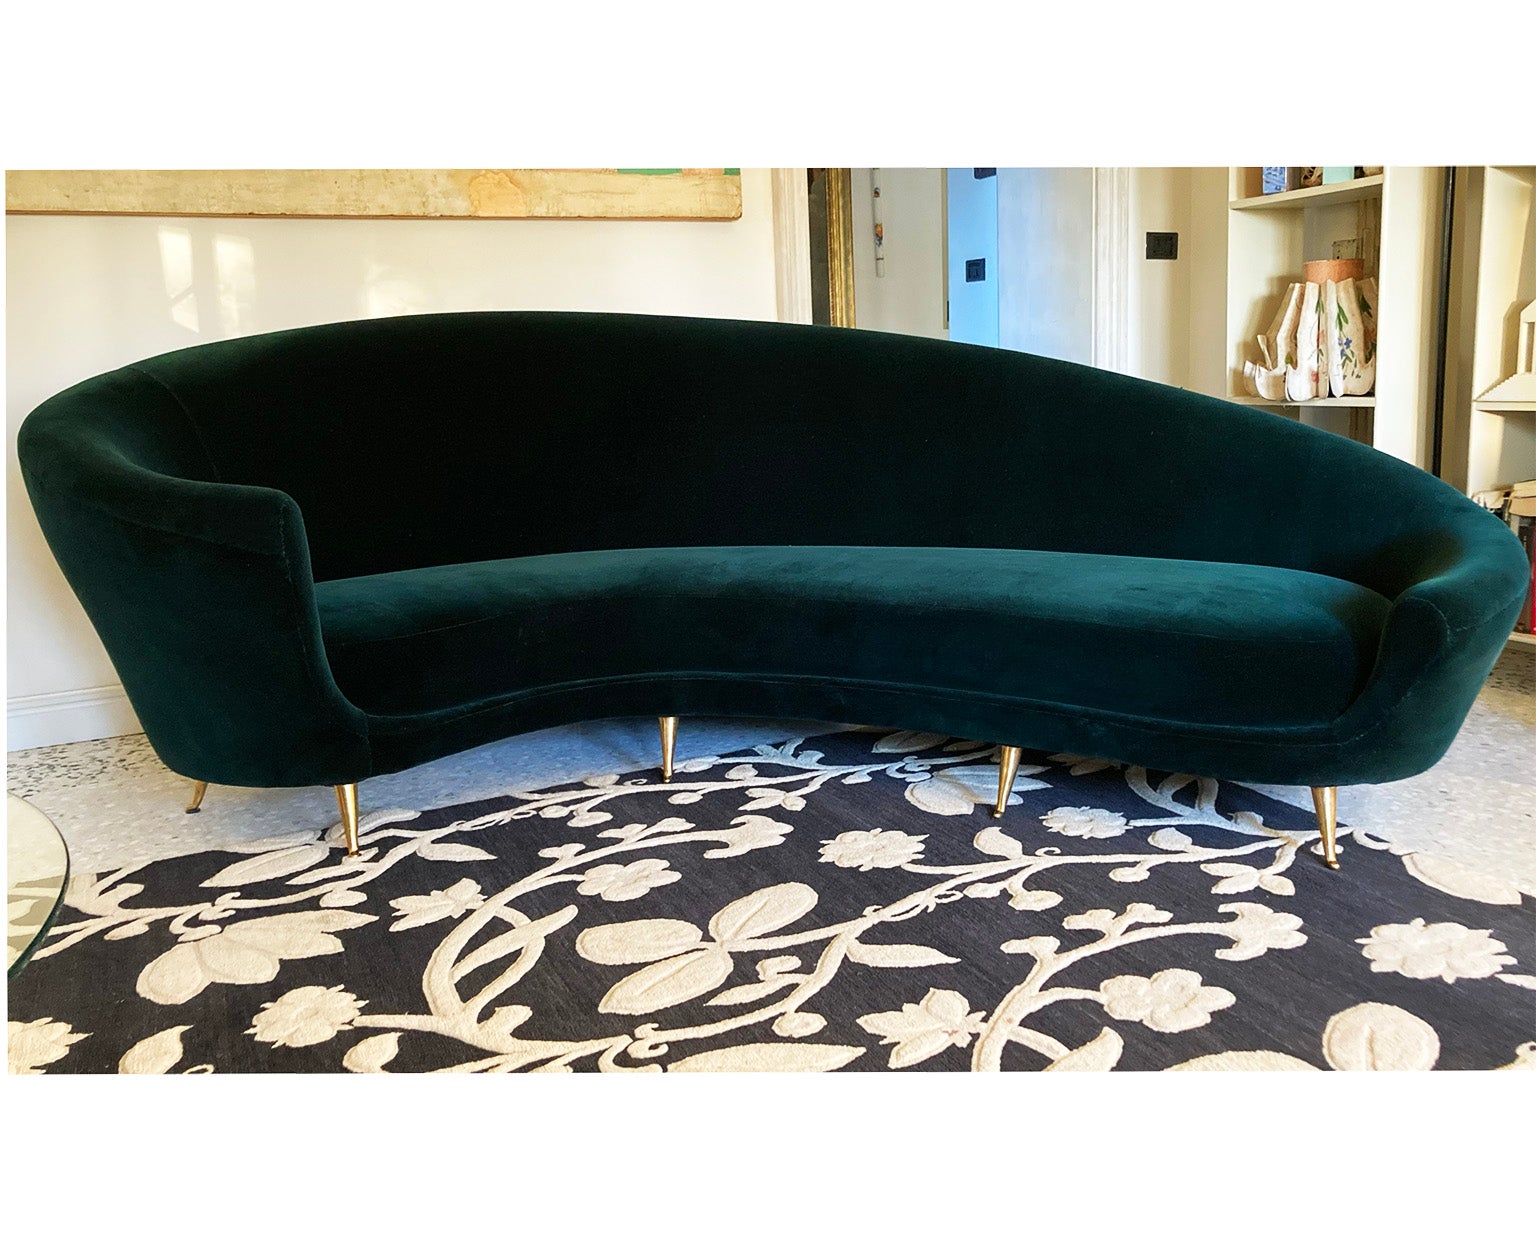 Mid-Century Modern Italian green velvet curved sofa by I.S.A, Italy 1950s.
Fine Design with well proportioned curved shape, with brass feet that gives another touch of elegance. 
The green velvet is pure cotton italian velvet.

The listed PRICE 